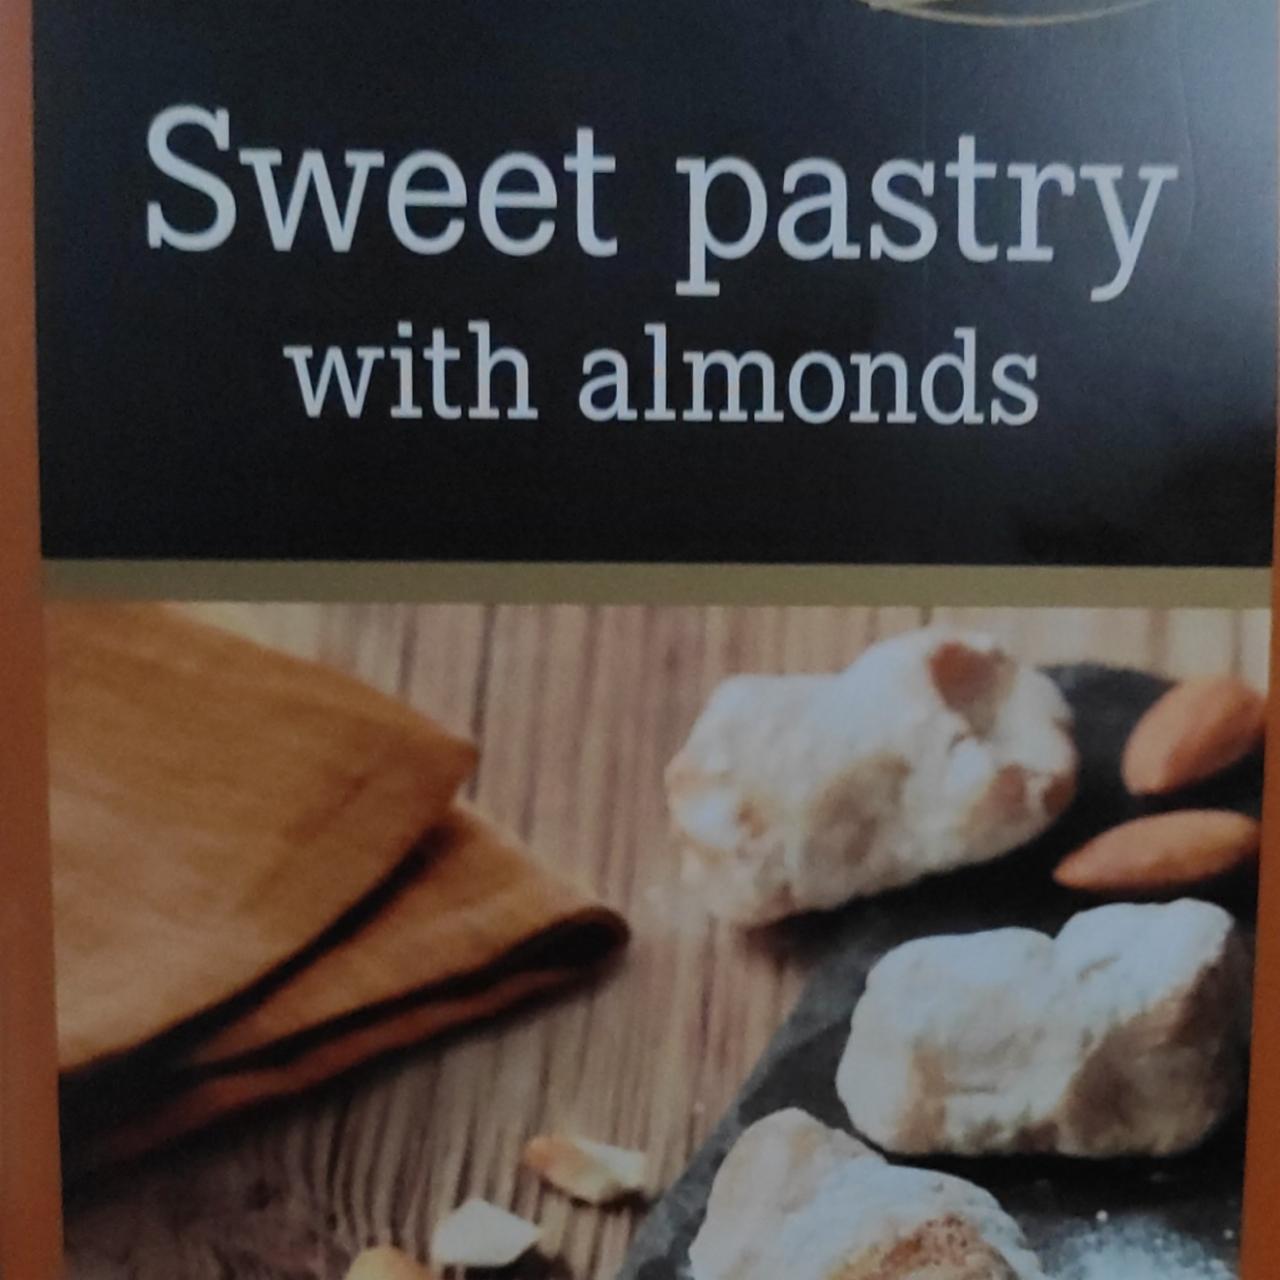 Fotografie - Sweet pastry with almonds Sondey